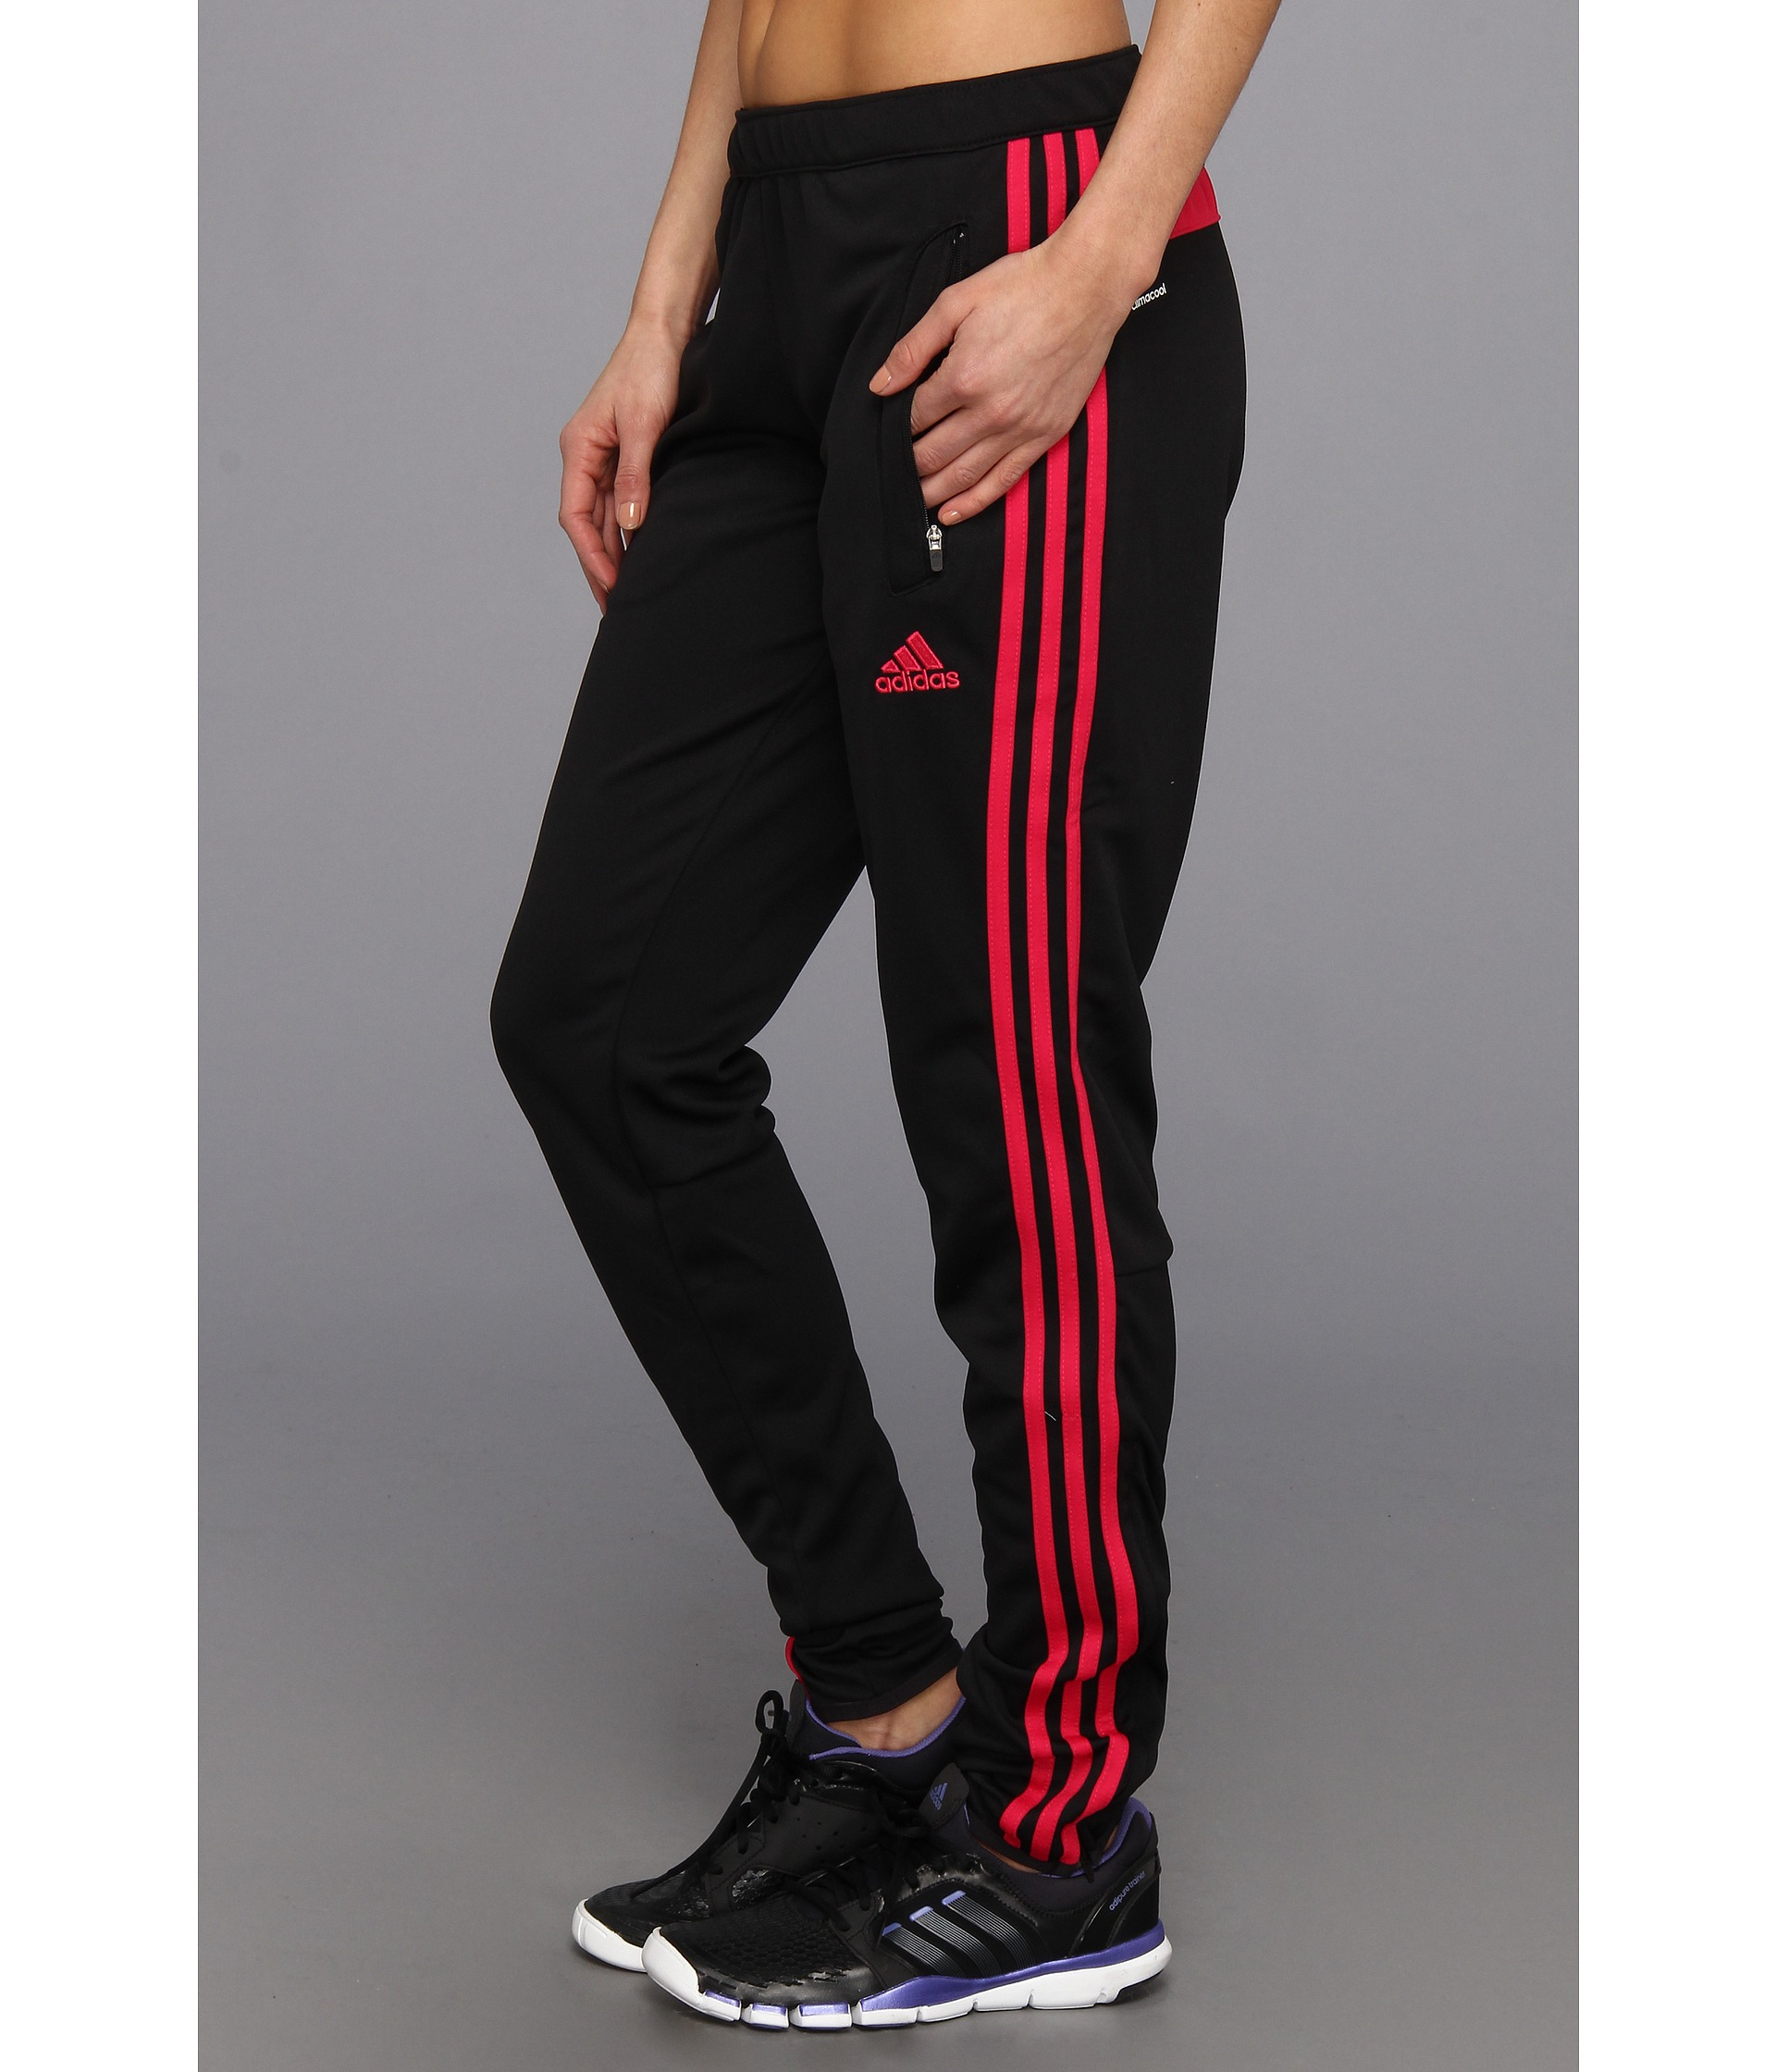 red climacool adidas pants